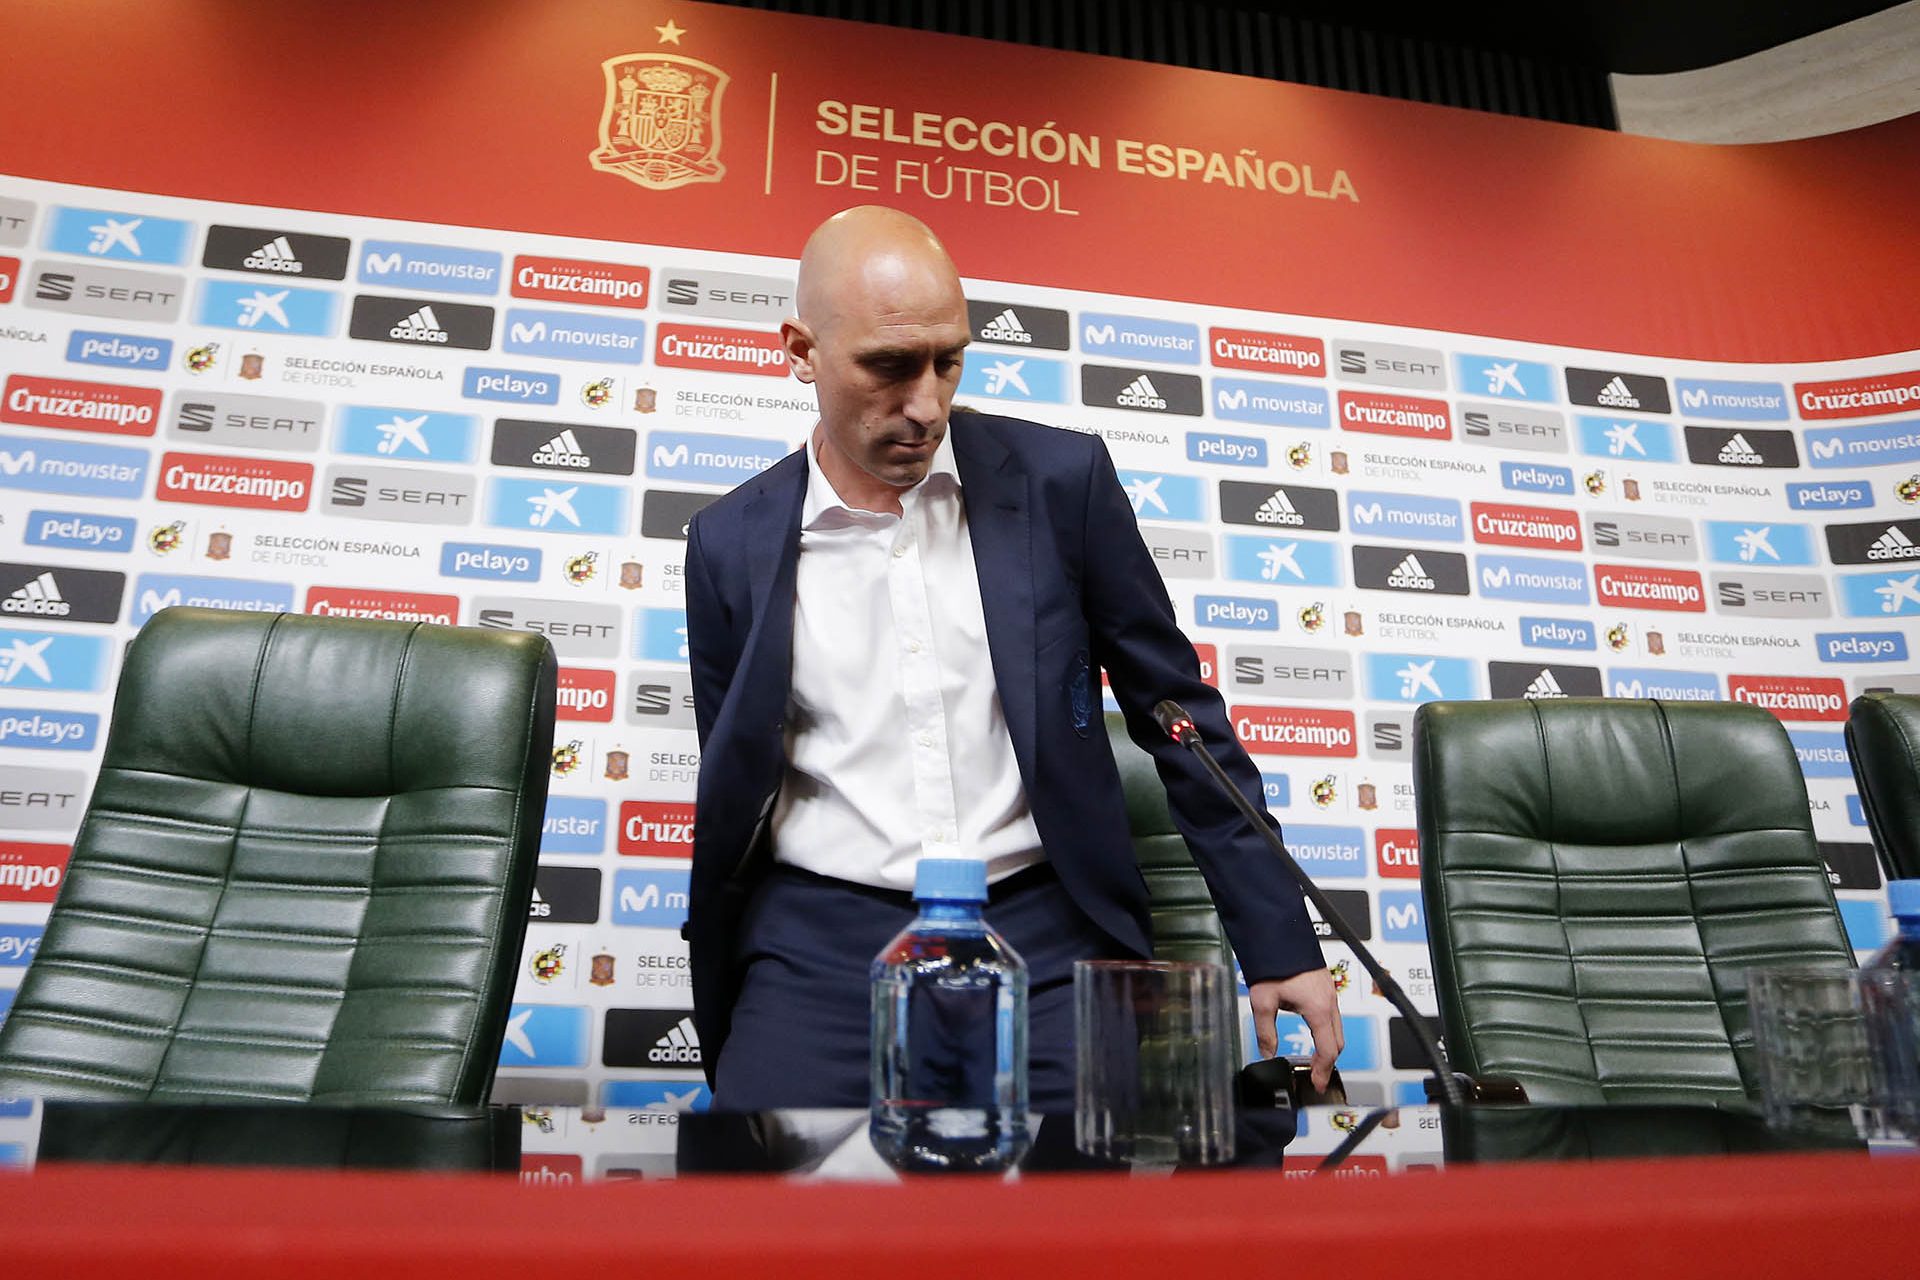 Luis Rubiales: Spanish FA president's mother declares a hunger strike over kiss scandal